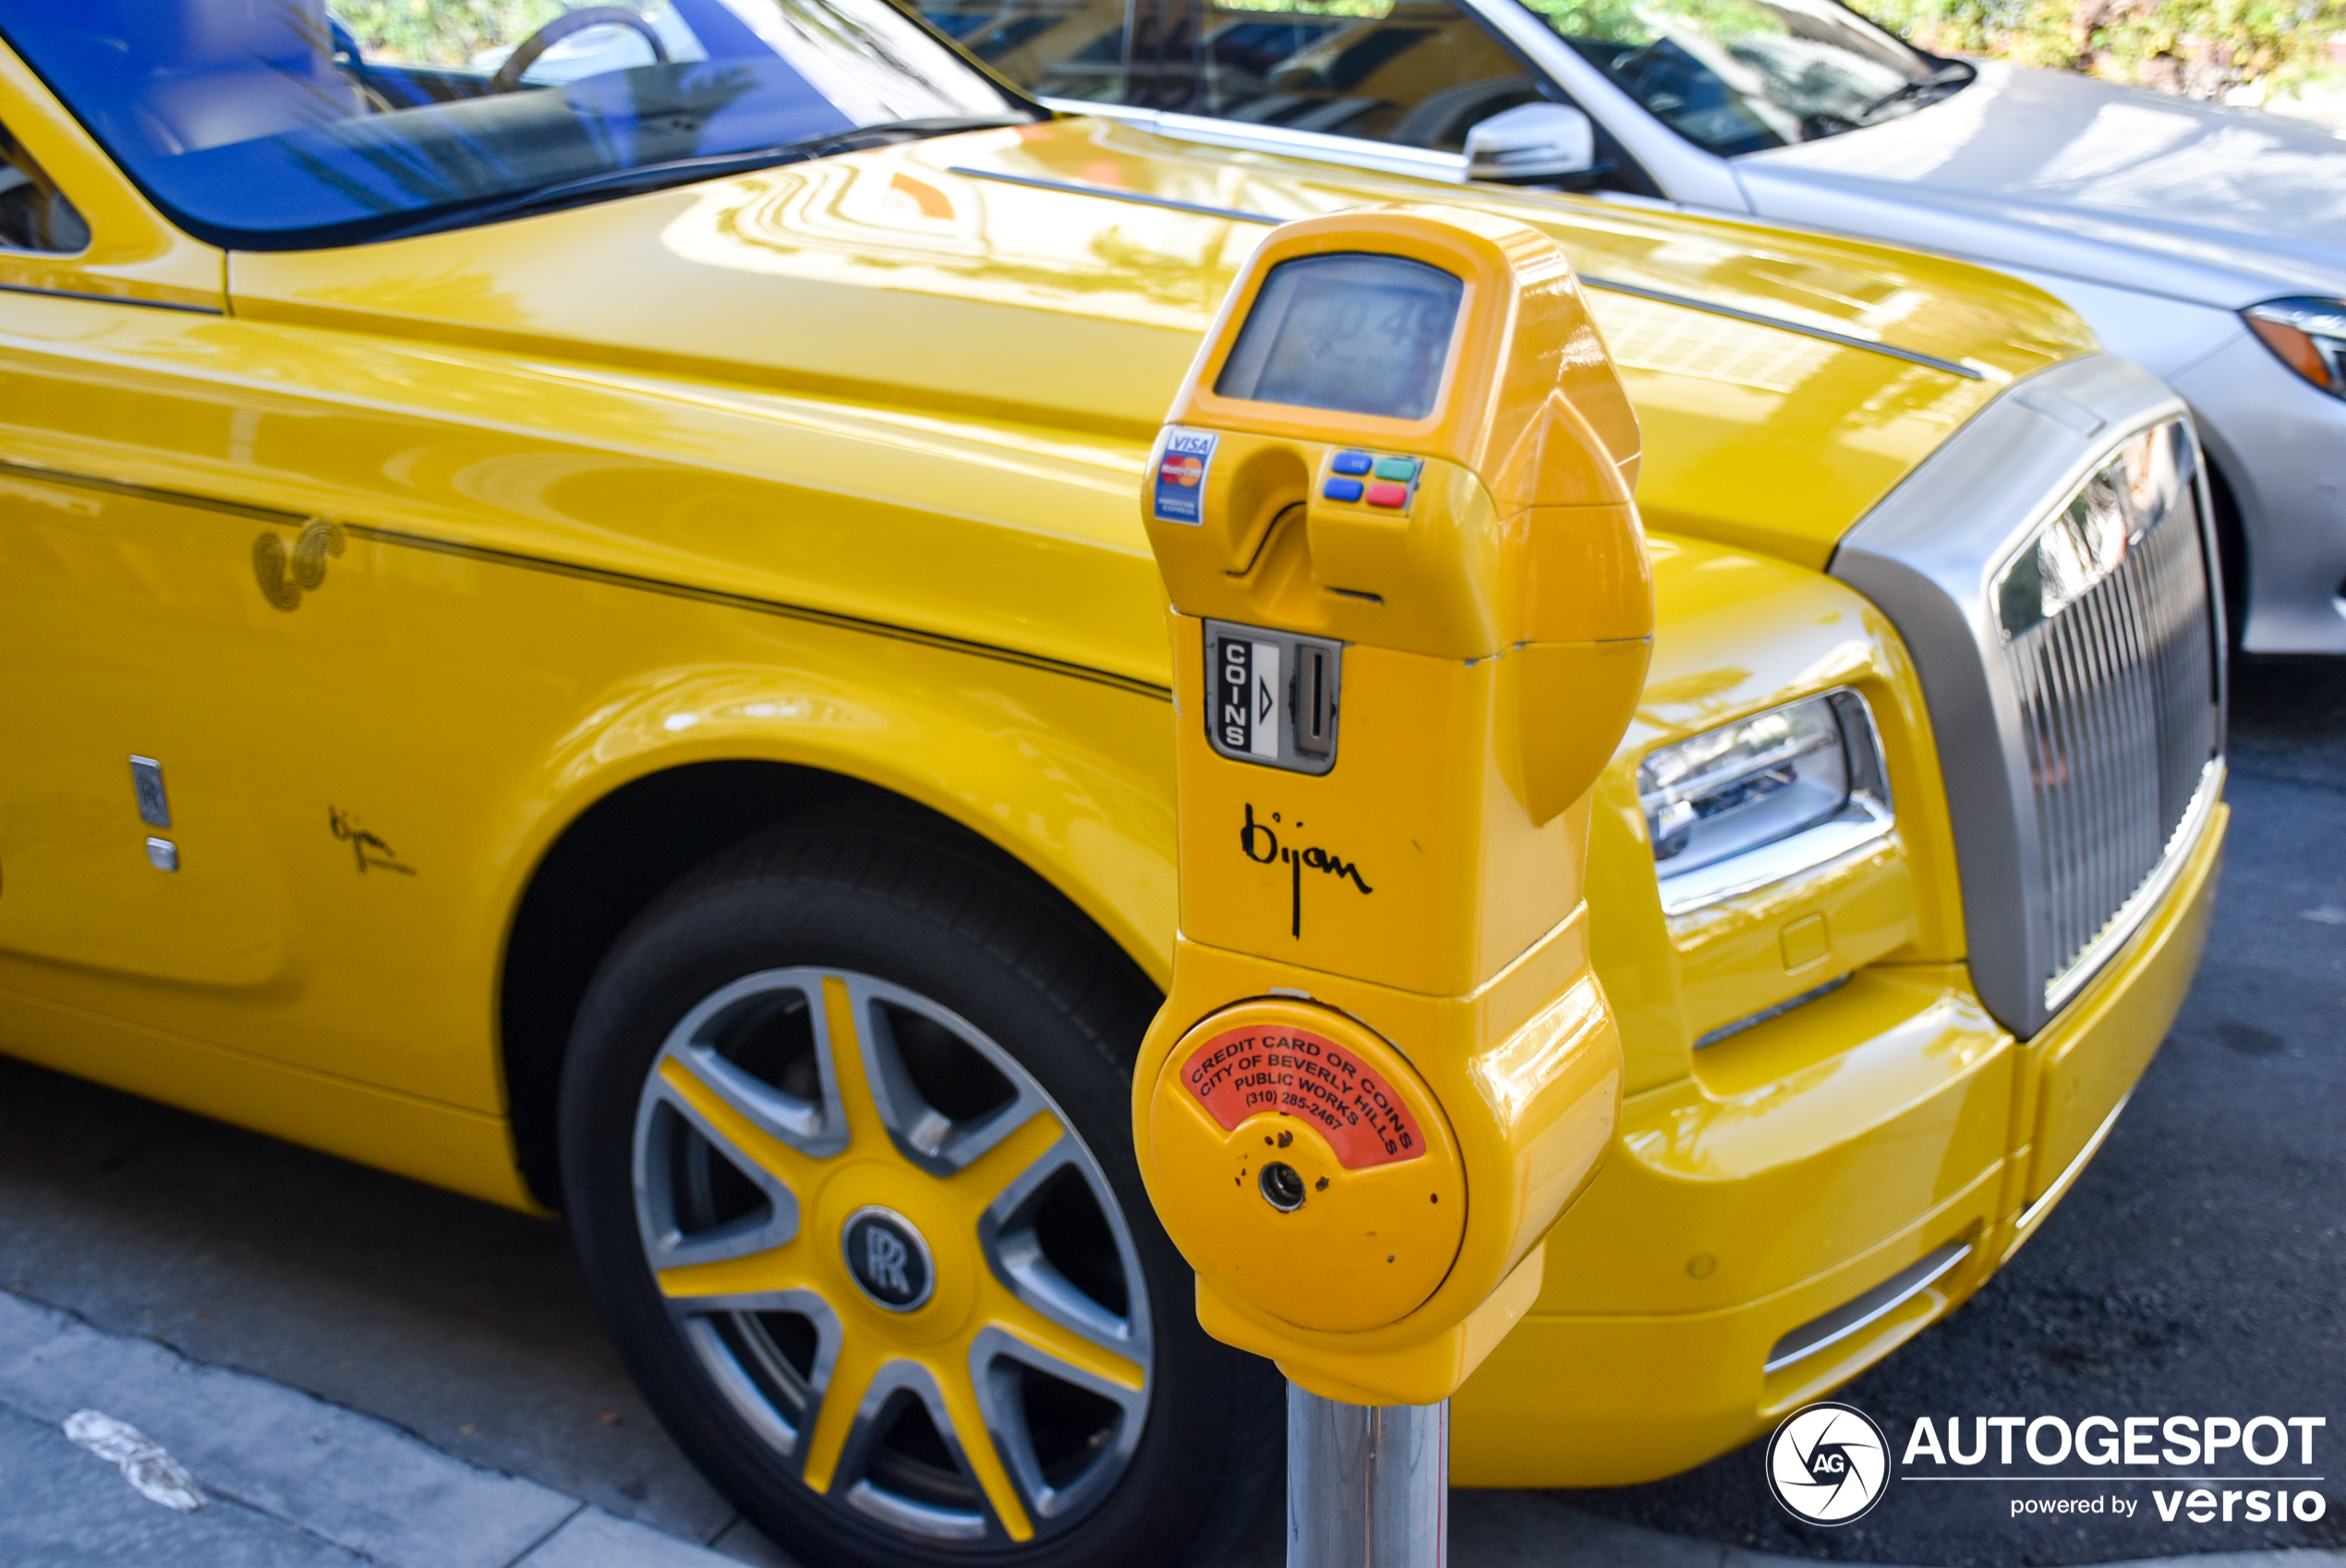 In Beverly Hills, people have private parking meters